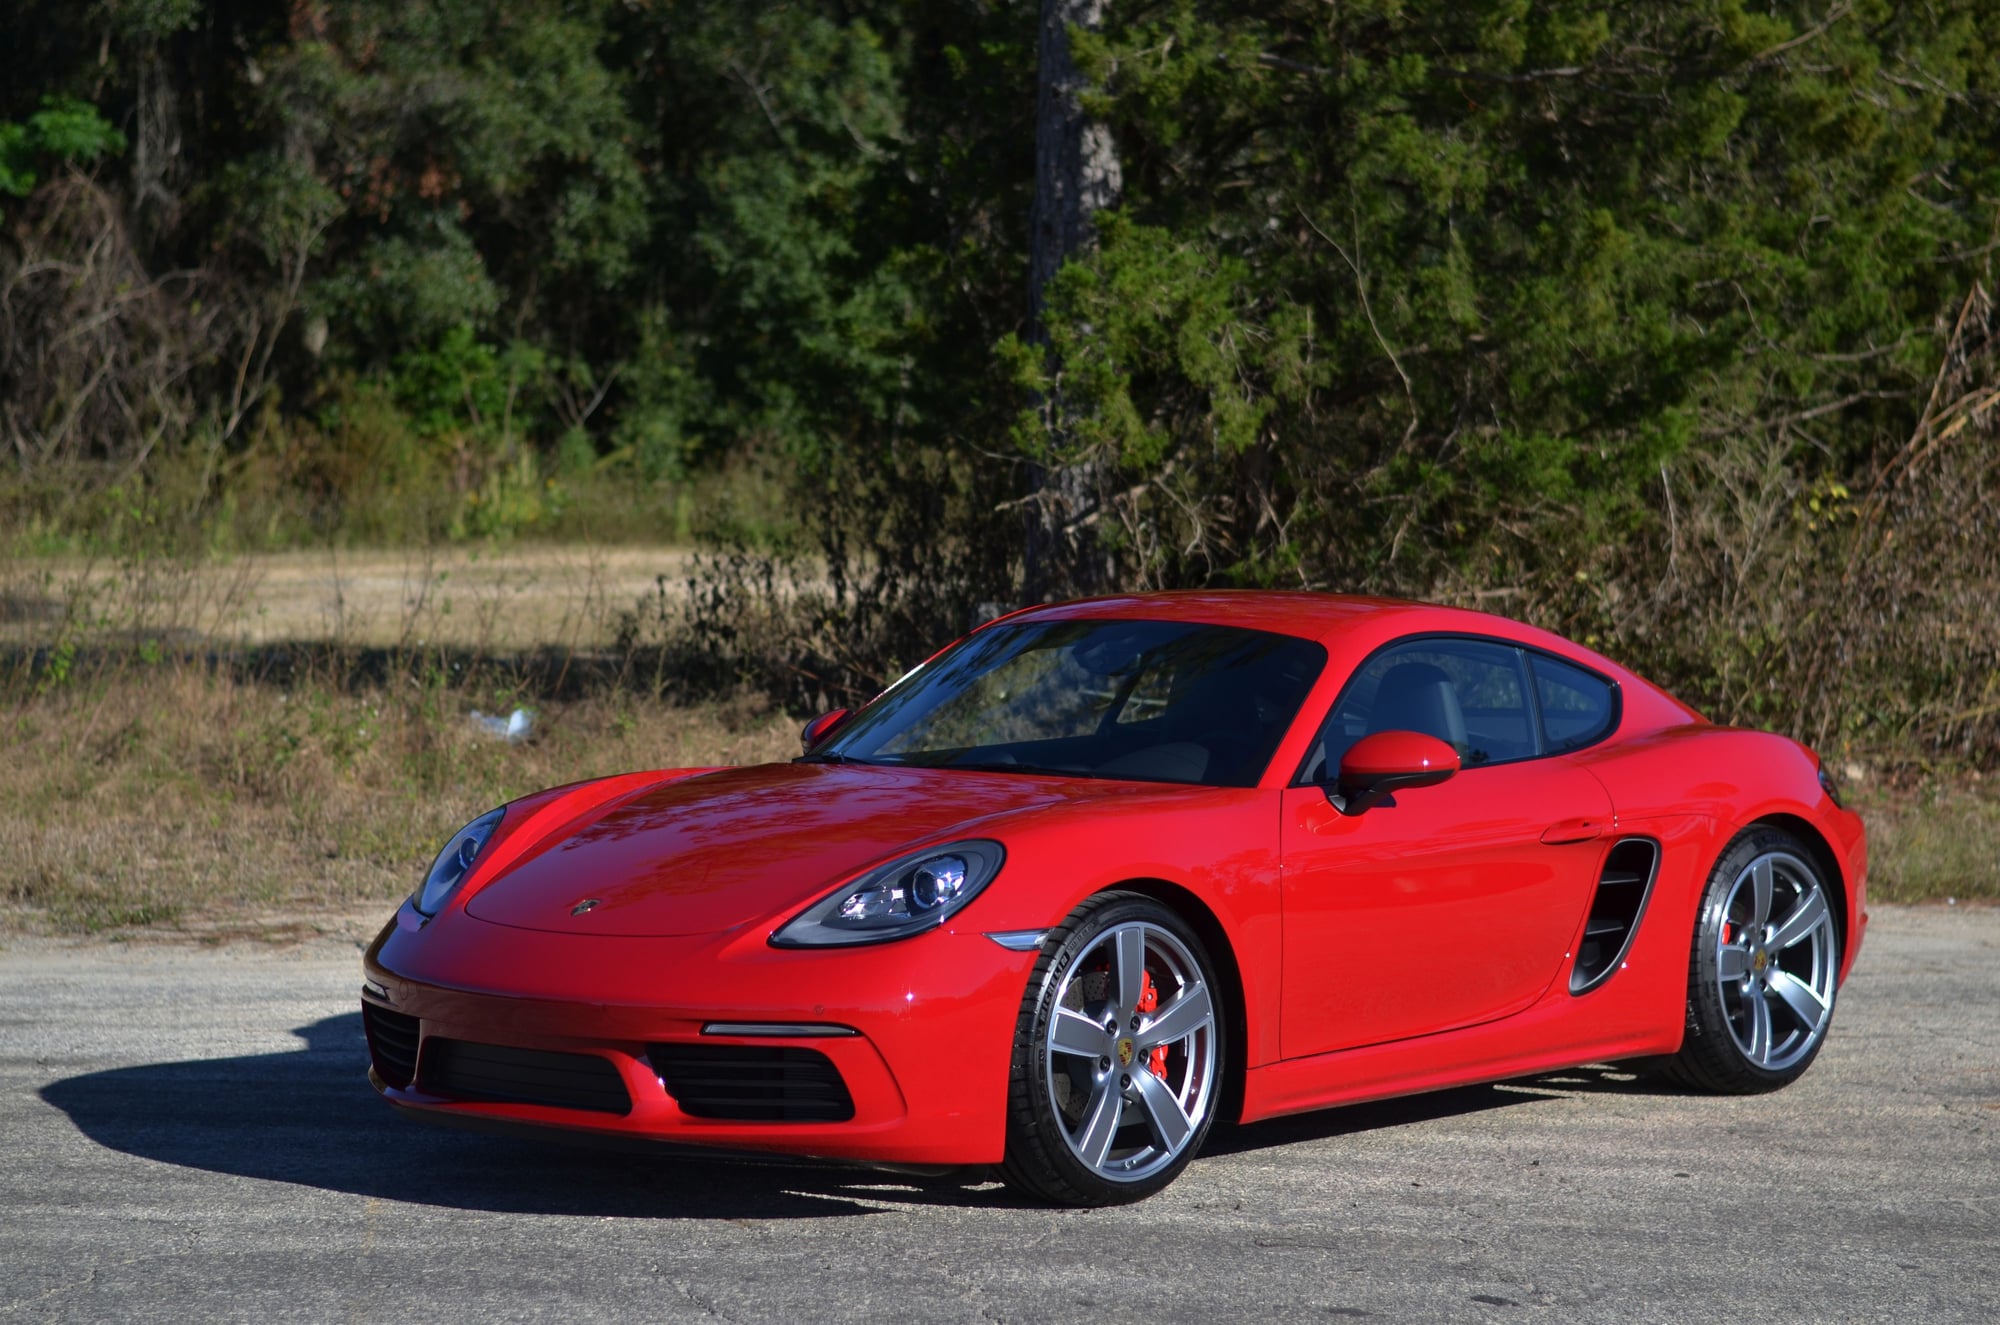 2018 Porsche 718 Cayman - 2018 718 Cayman S MANUAL, great options in Carmine Red, new @ FL Porsche dealer - New - VIN WP0AB2A86JK278857 - 68 Miles - 4 cyl - 2WD - Manual - Coupe - Red - Tallahassee, FL 32304, United States